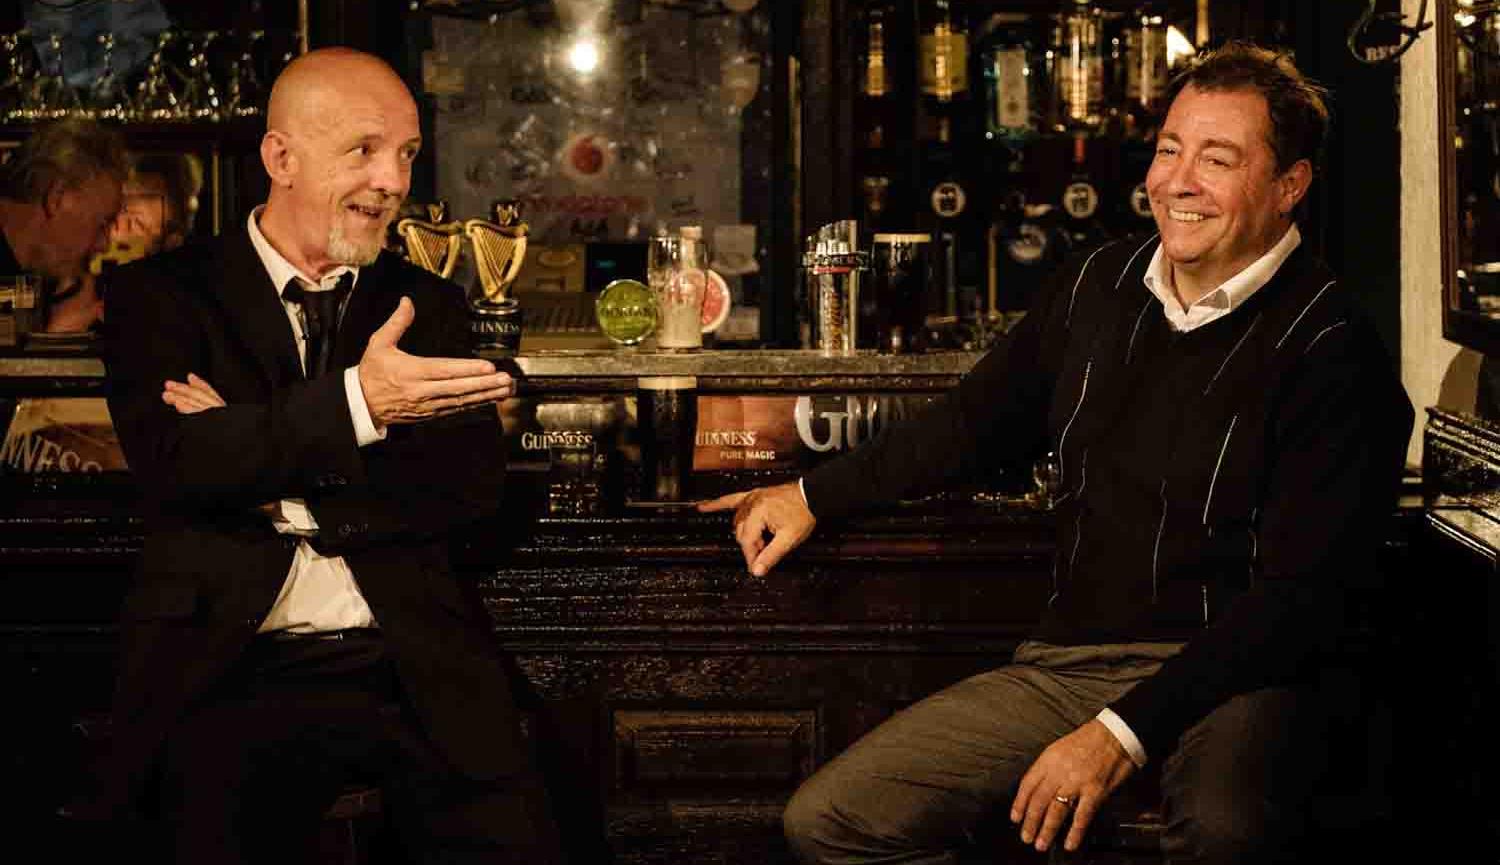 Two pints image of two men sitting at a bar talking